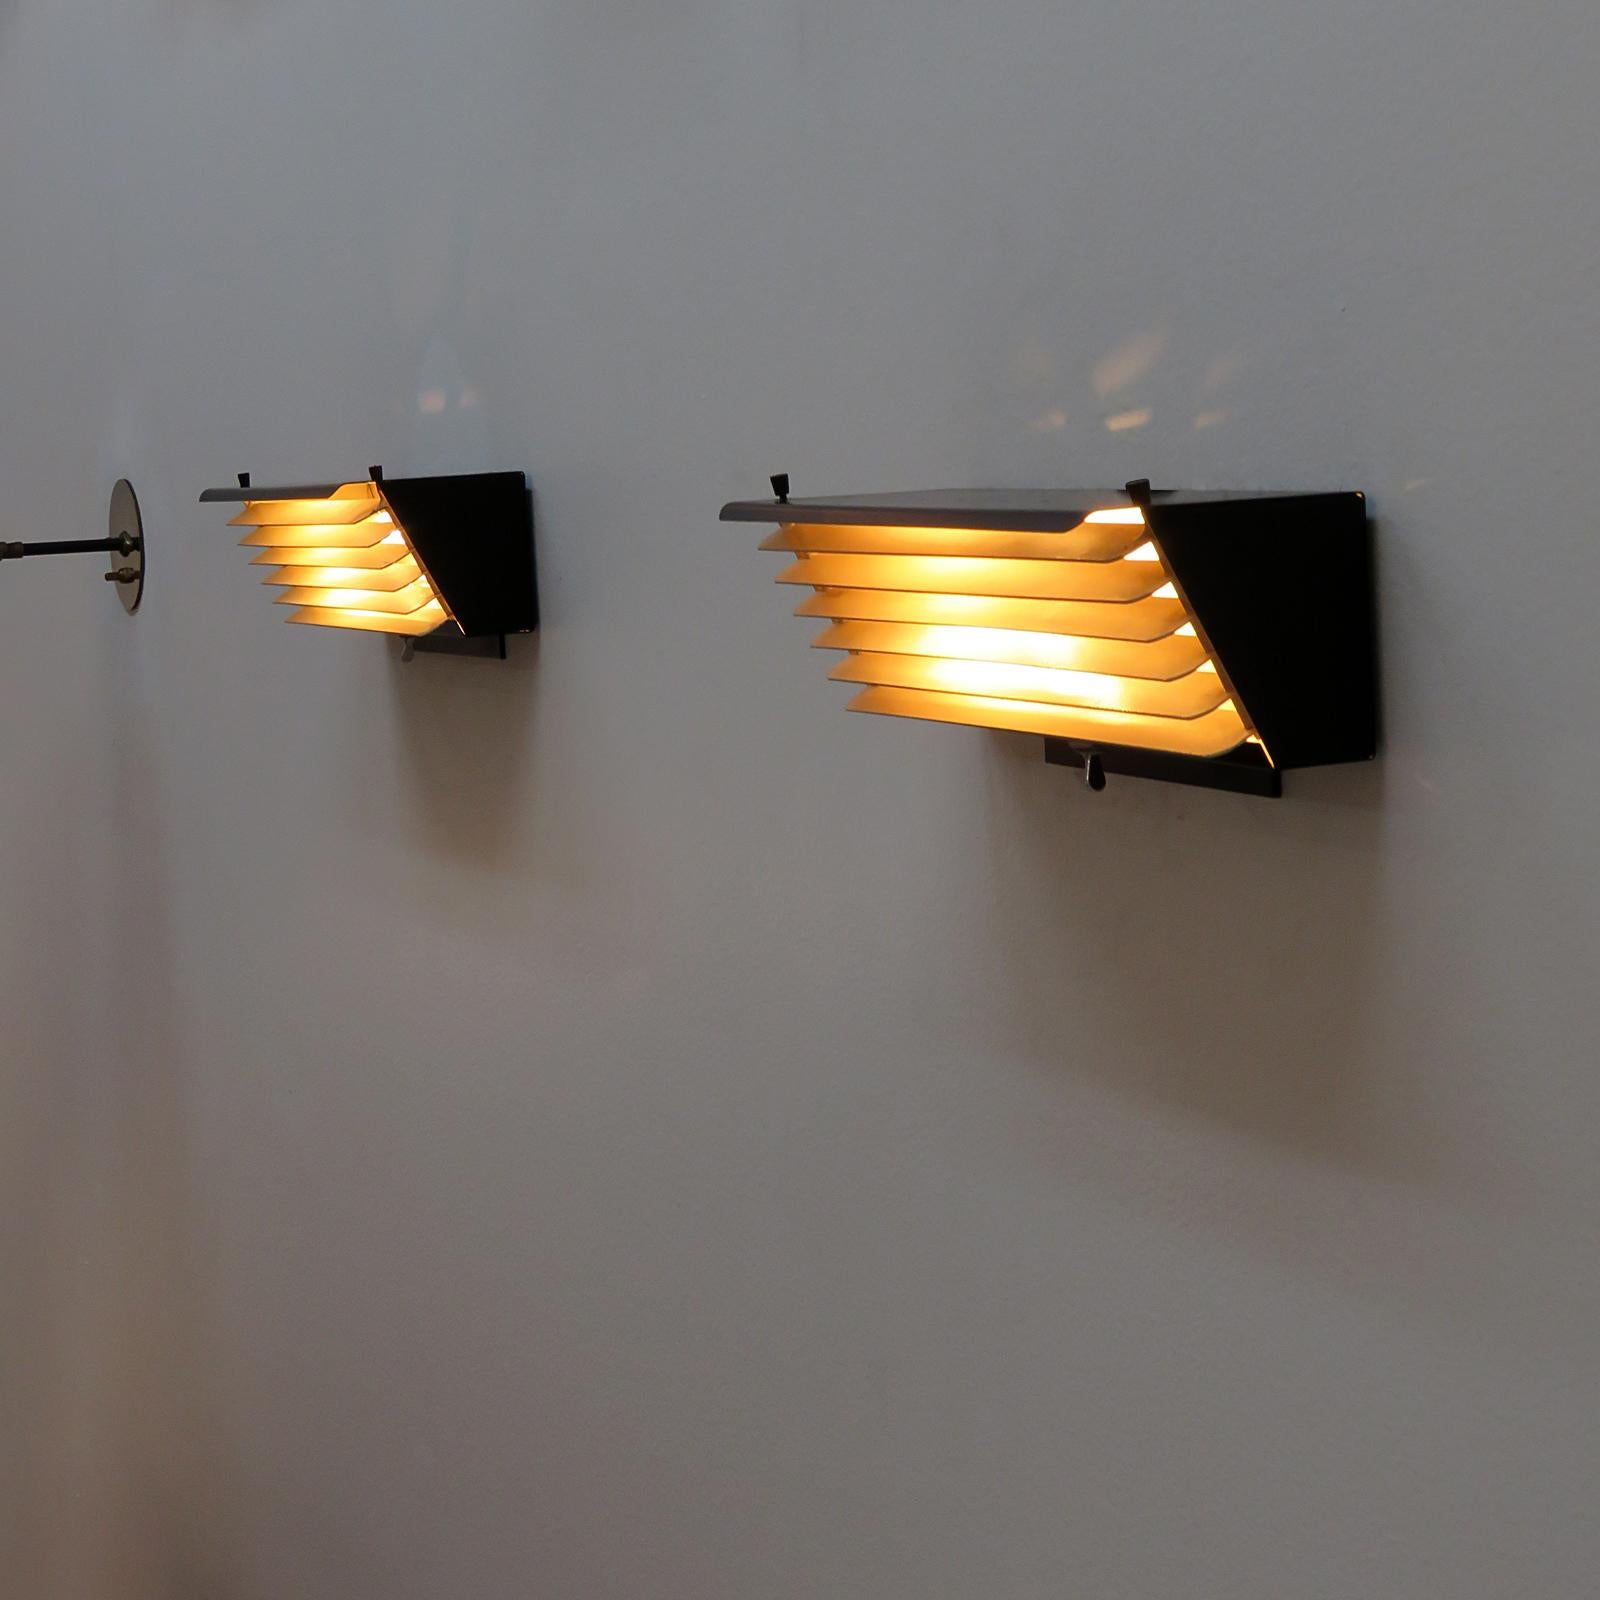 Jacques Biny for Luminalite Edition Model '212' Wall Lights 2